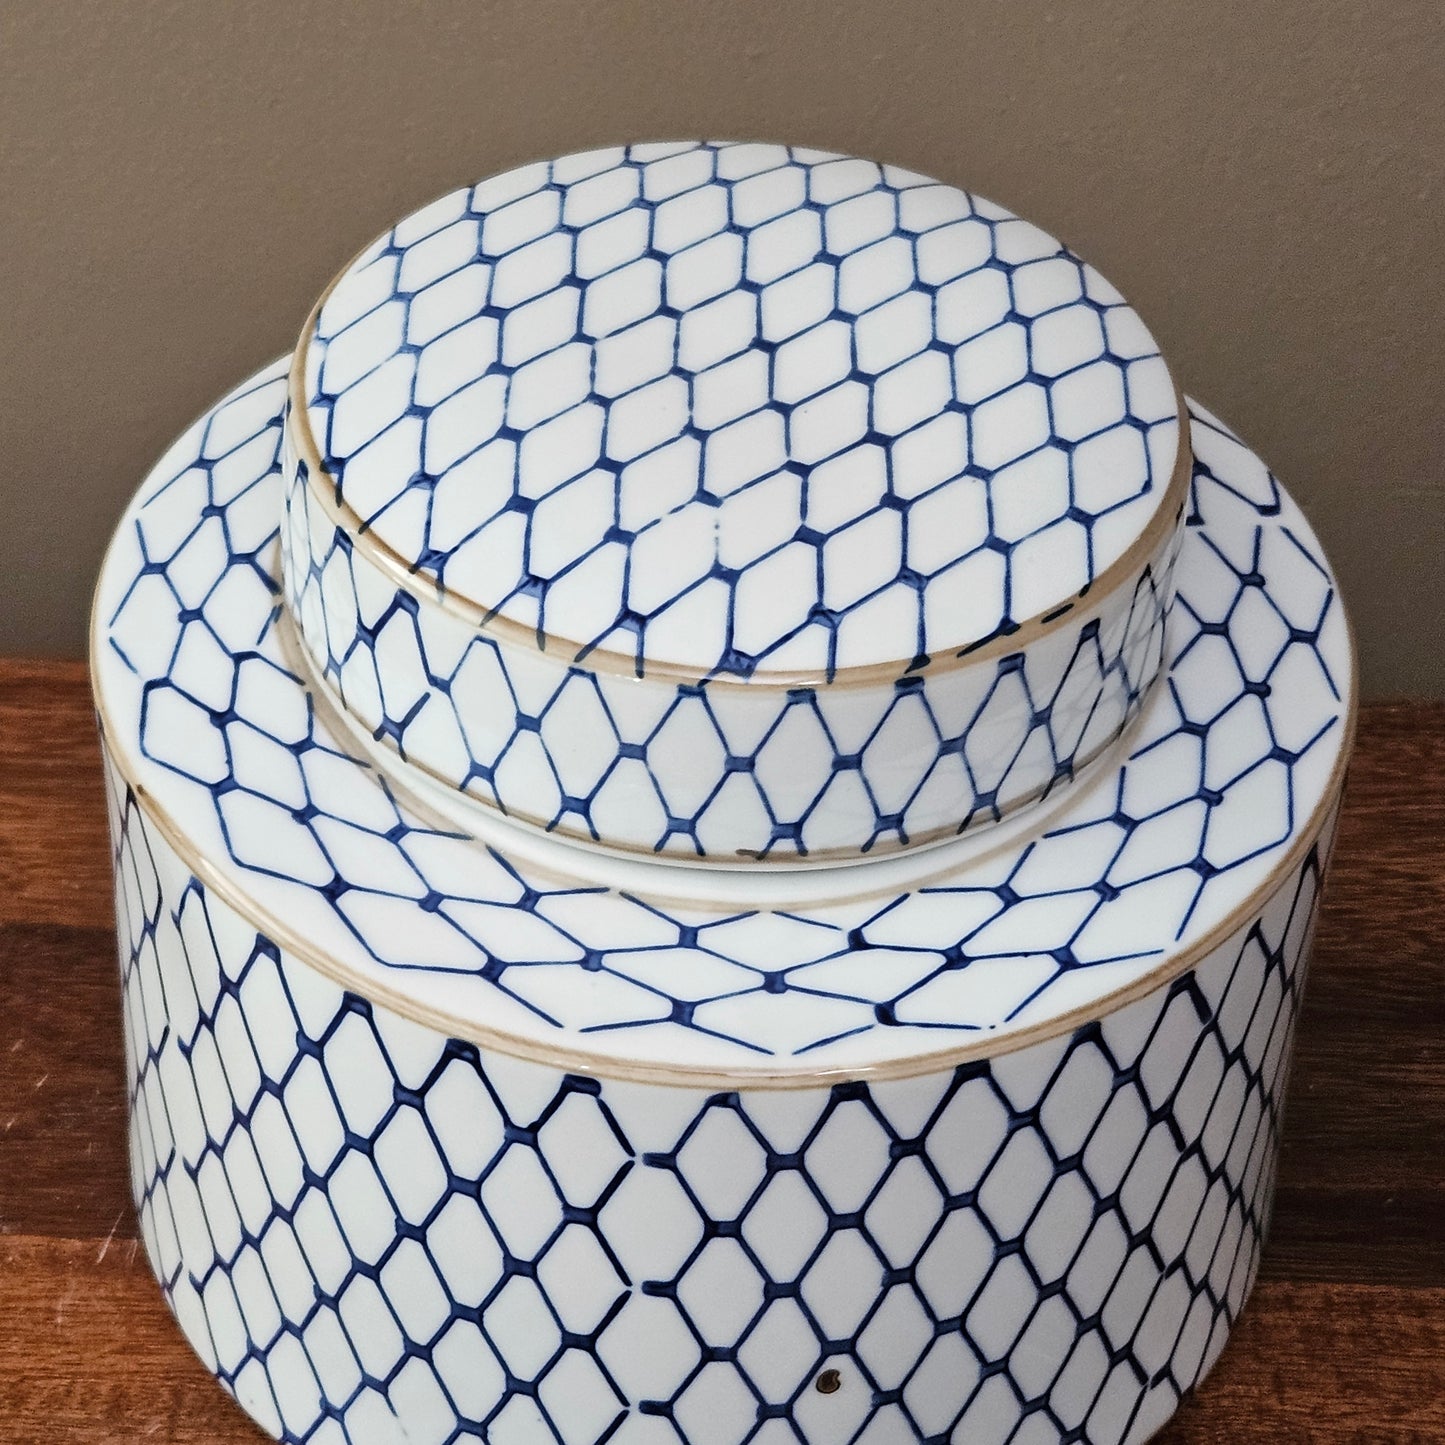 8" Blue & White Porcelain Canister Jar with Netted Design & Lid ~ 4 Available